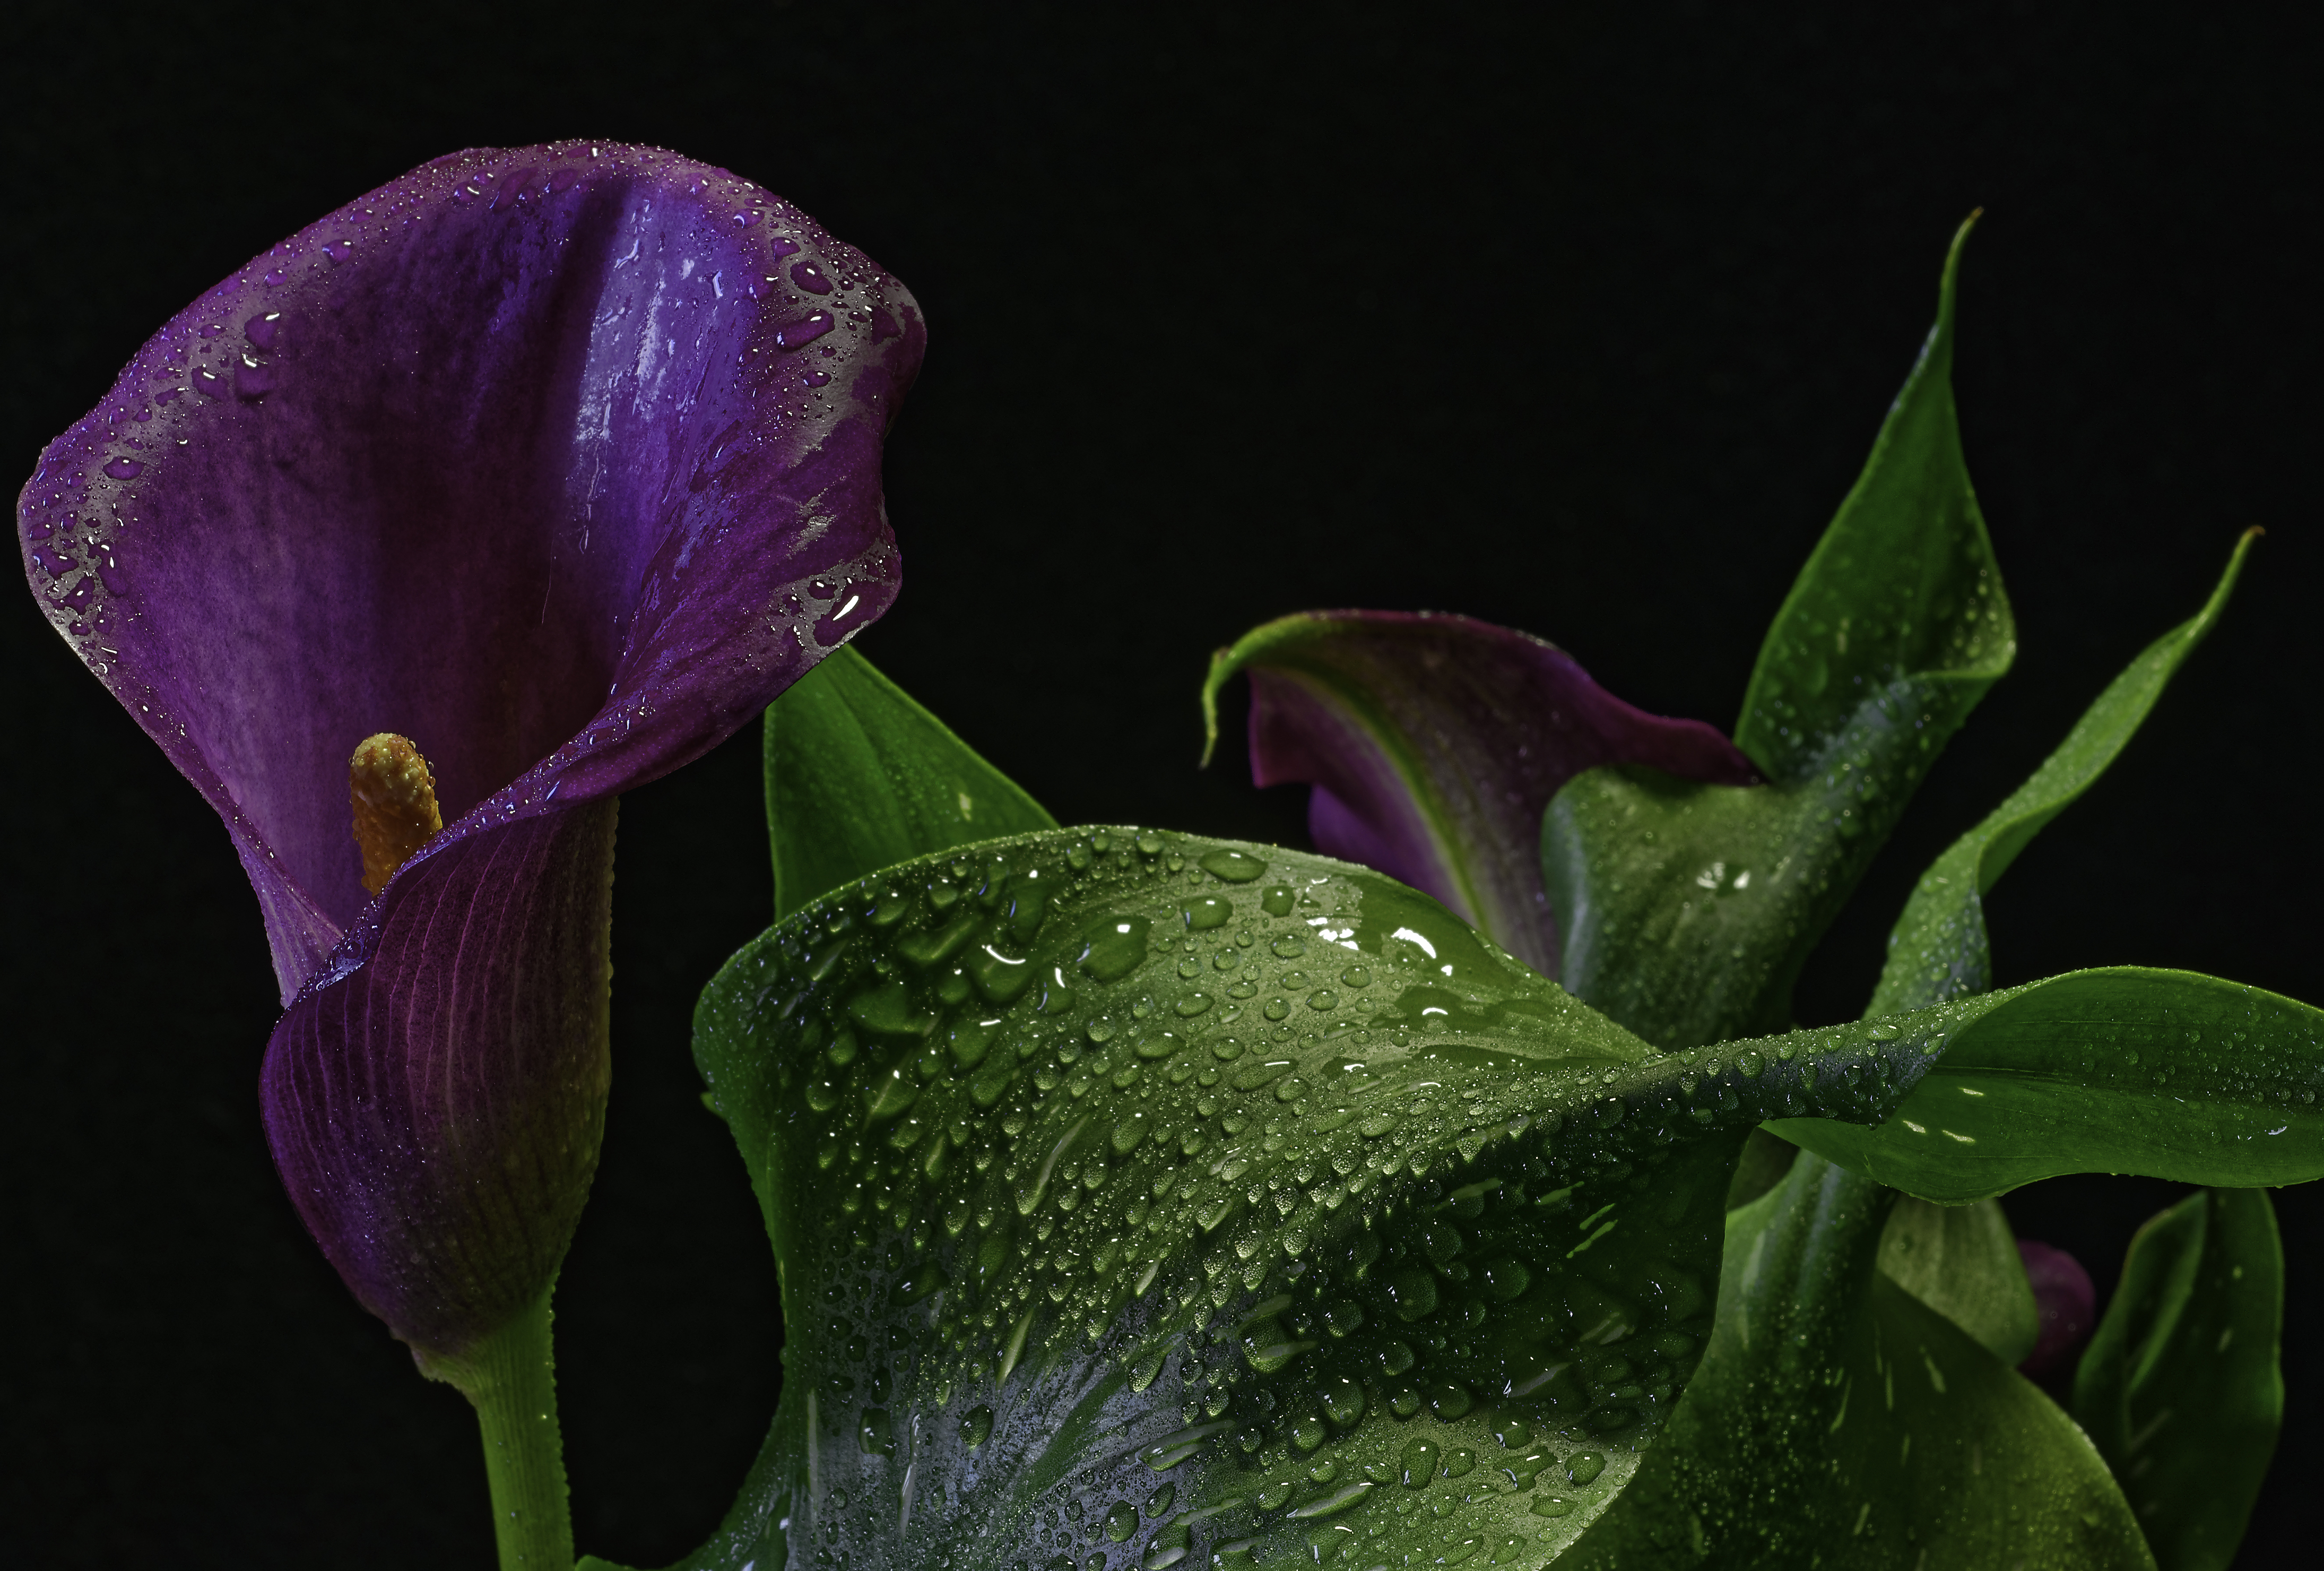 earth, calla lily, close up, flower, nature, purple flower, water drop, flowers iphone wallpaper